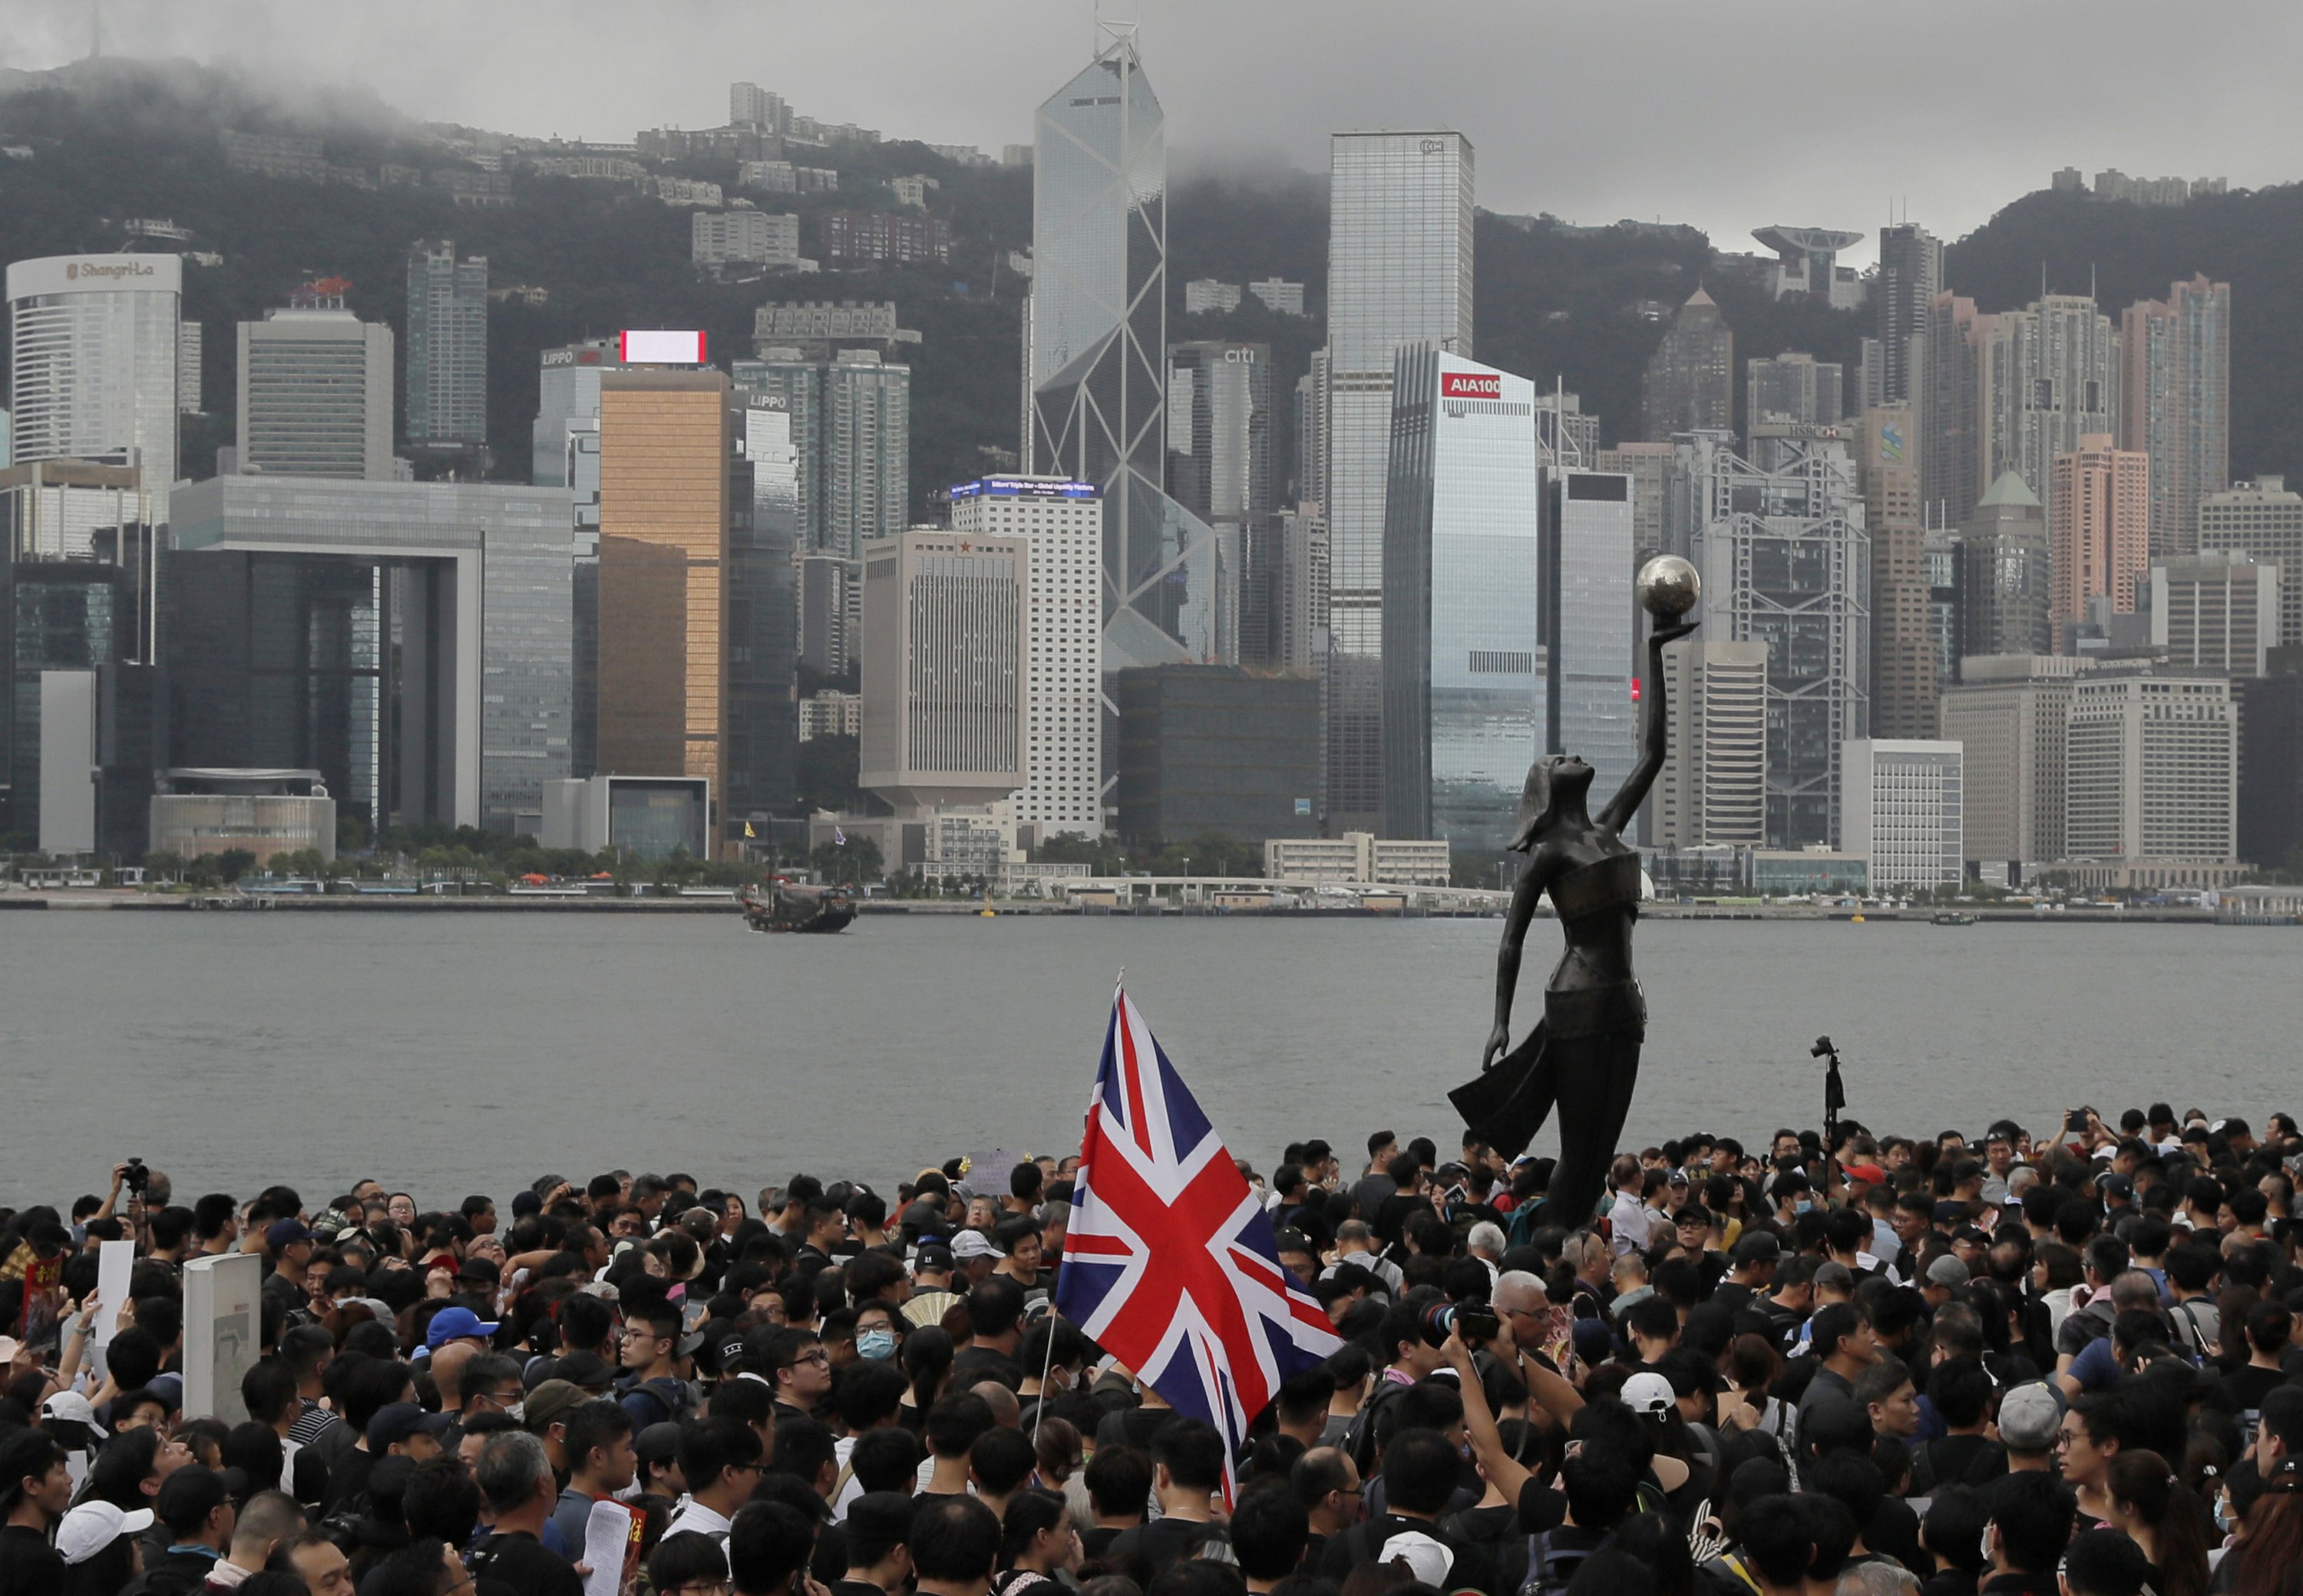 Thousands flee Hong Kong to UK for fear of Chinese repression